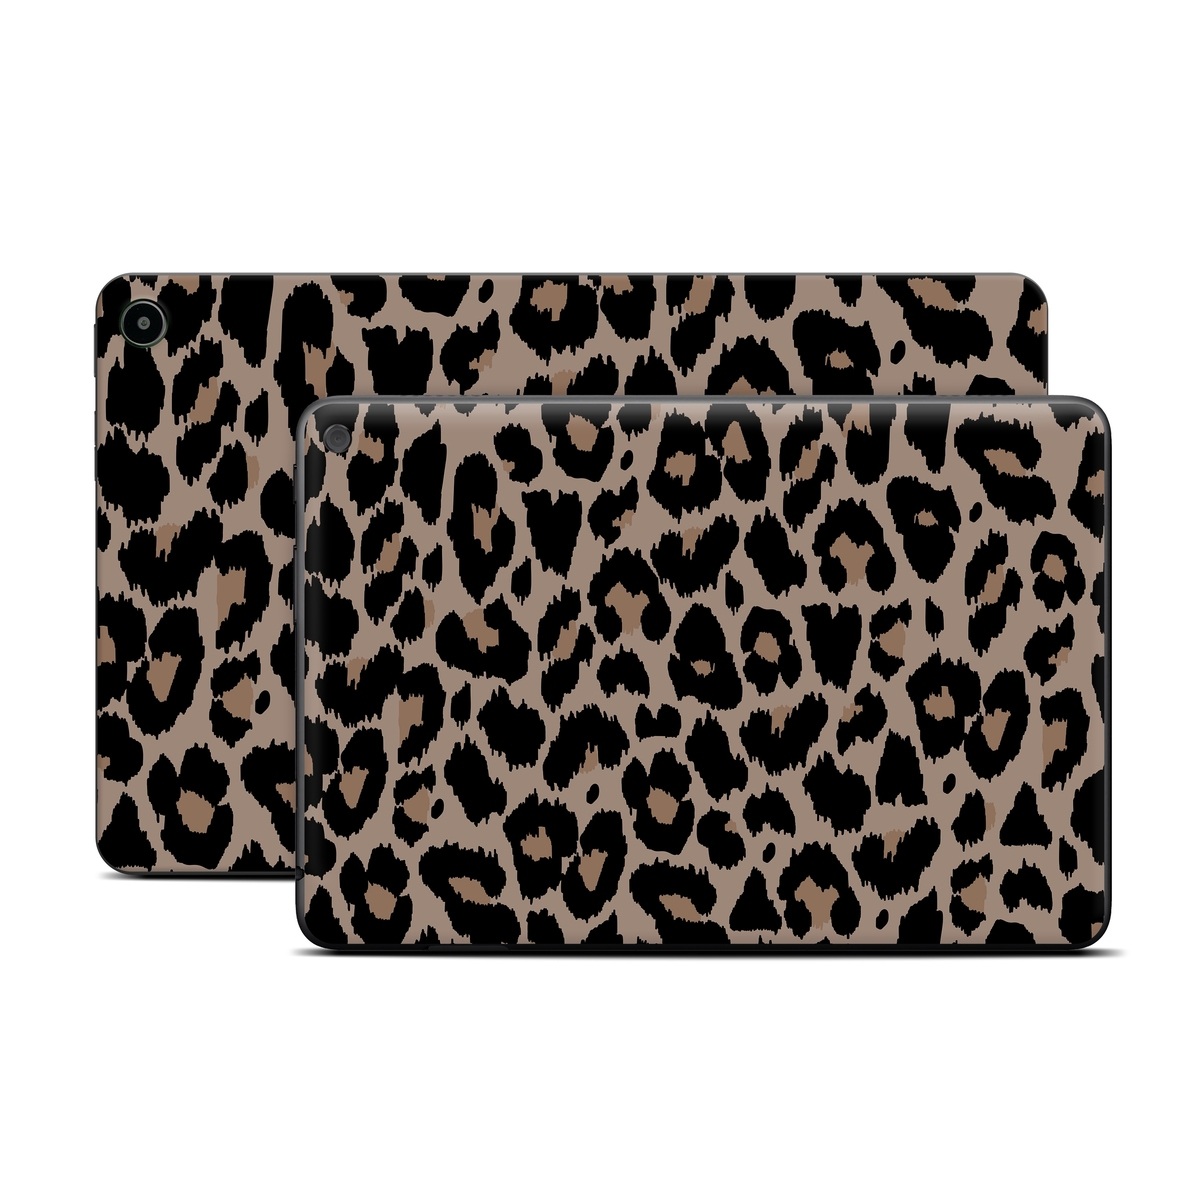 Amazon Fire Tablet Series Skin Skin design of Pattern, Brown, Fur, Design, Textile, Monochrome, Fawn, with black, gray, red, green colors